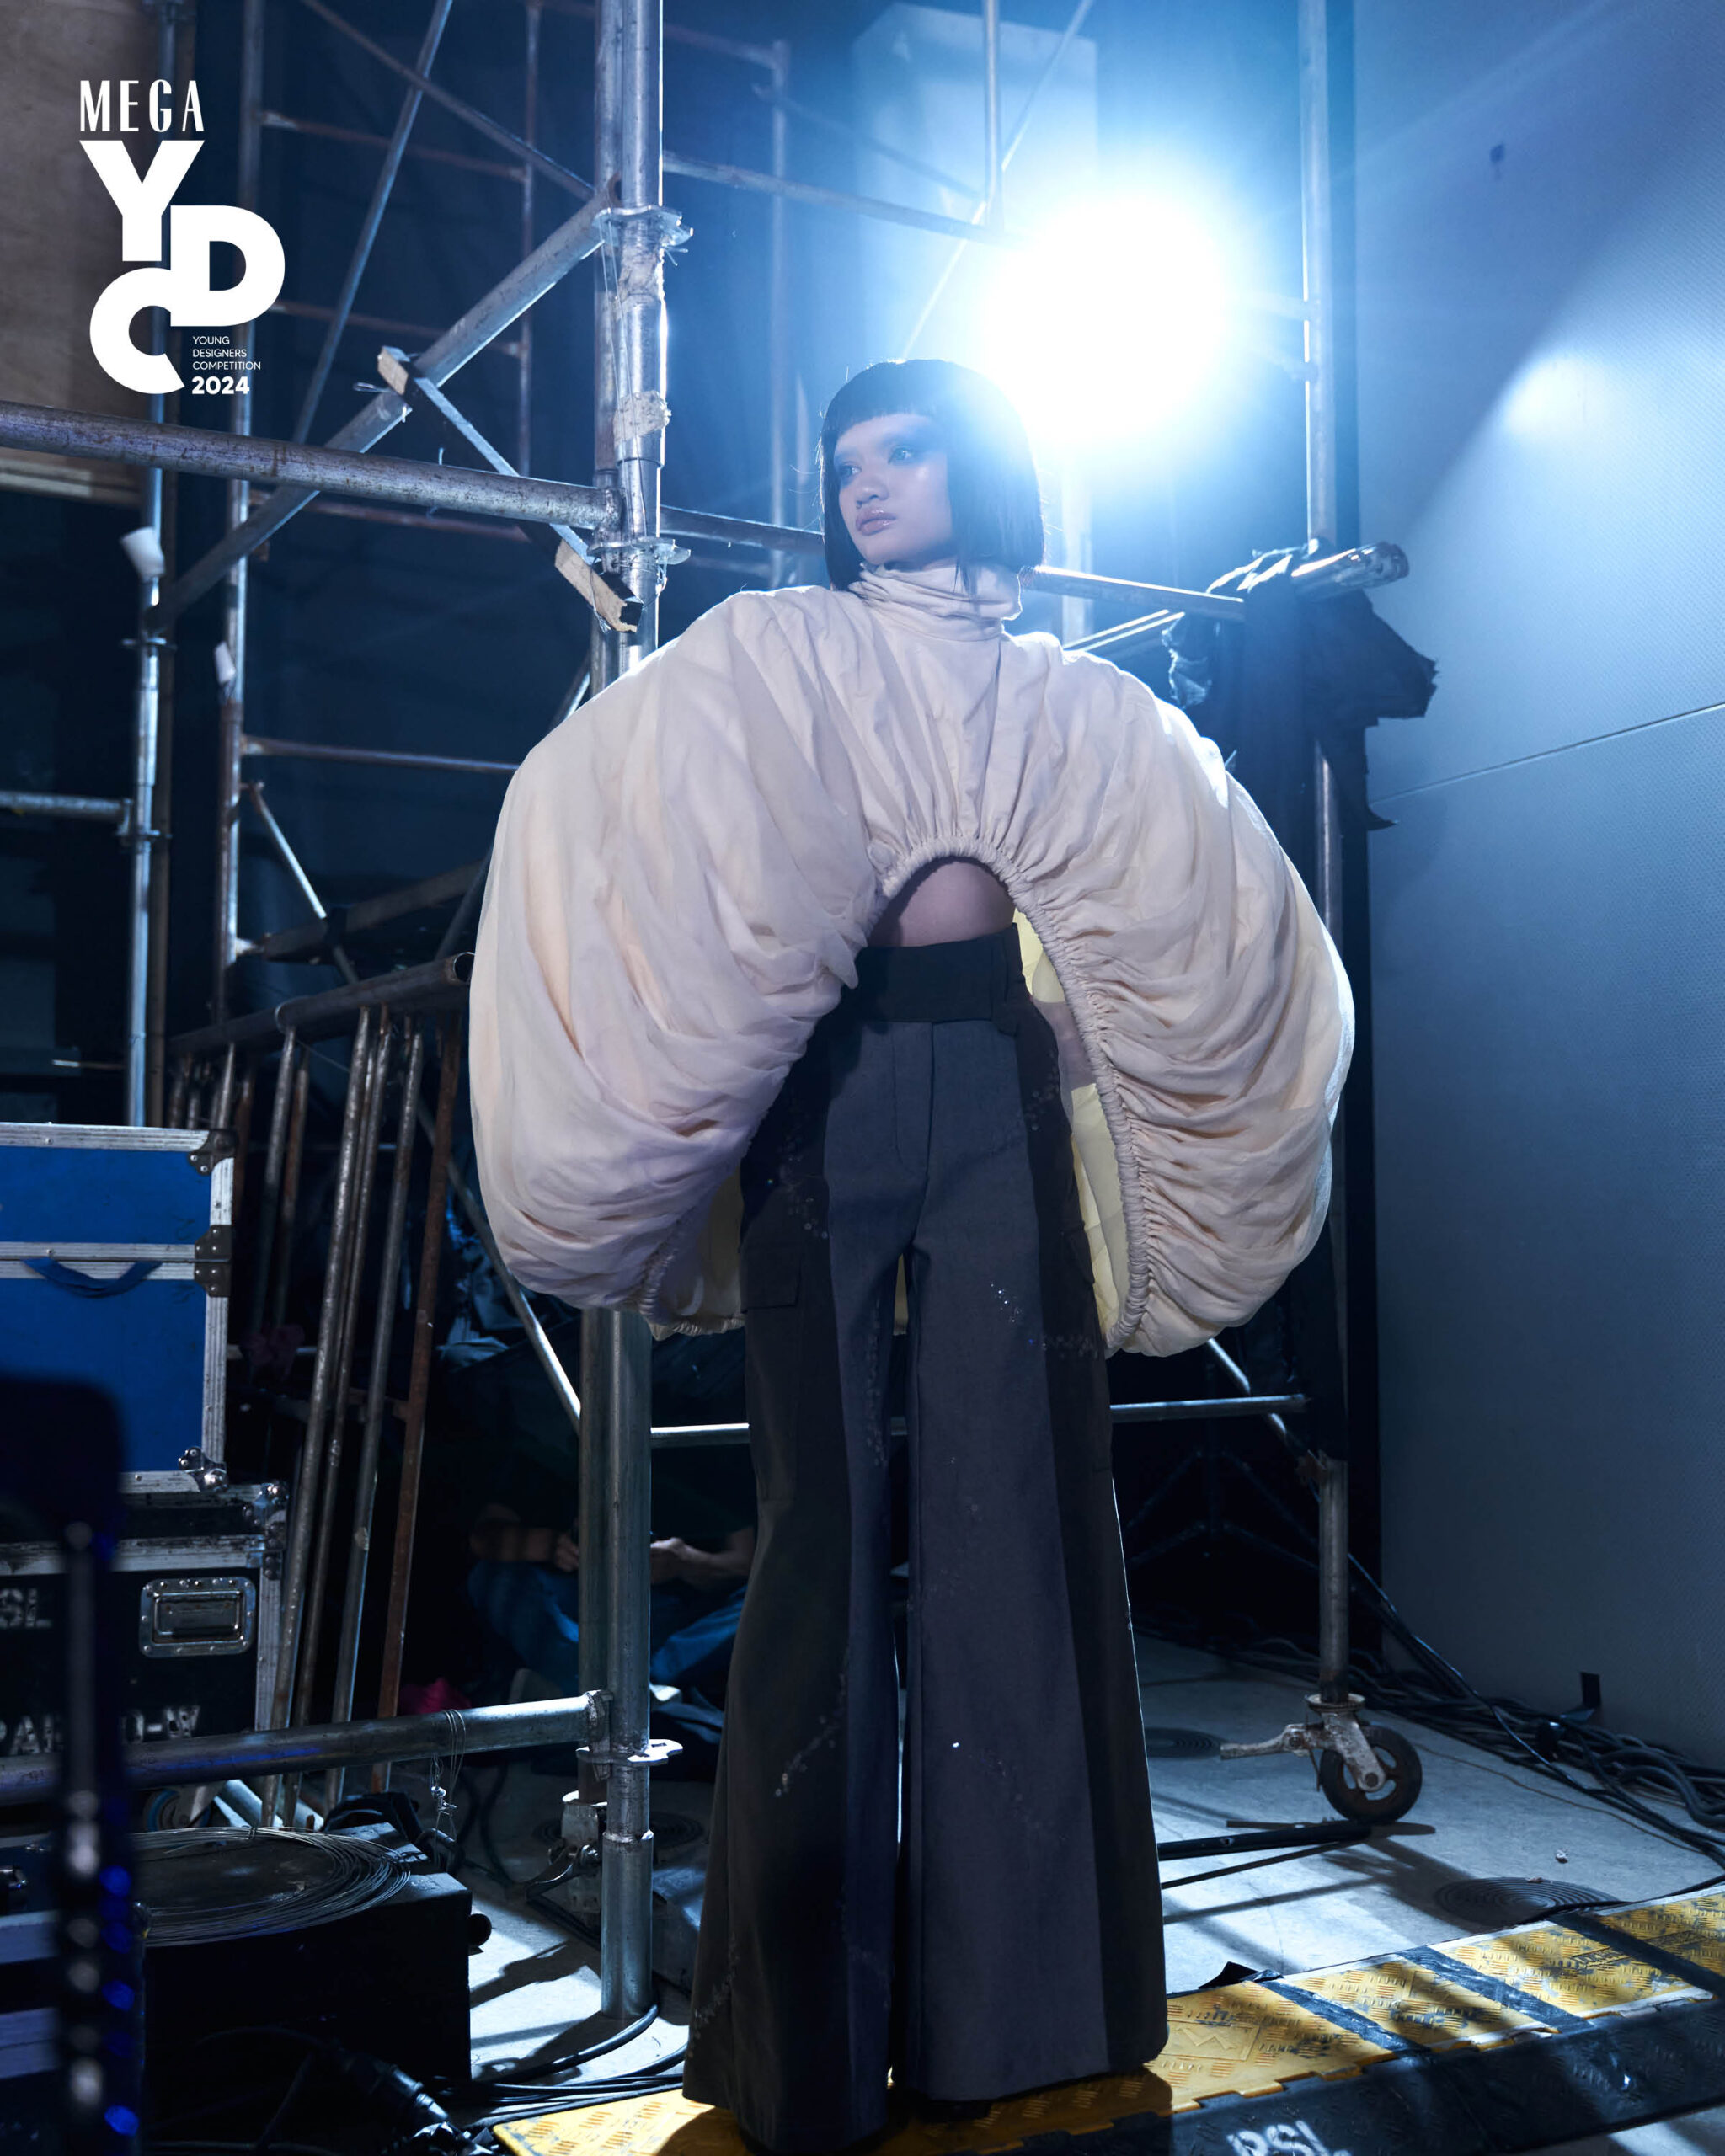 Sandro Dela Peña The Whale The Walk MEGA Young Designers Competition 2024 collection